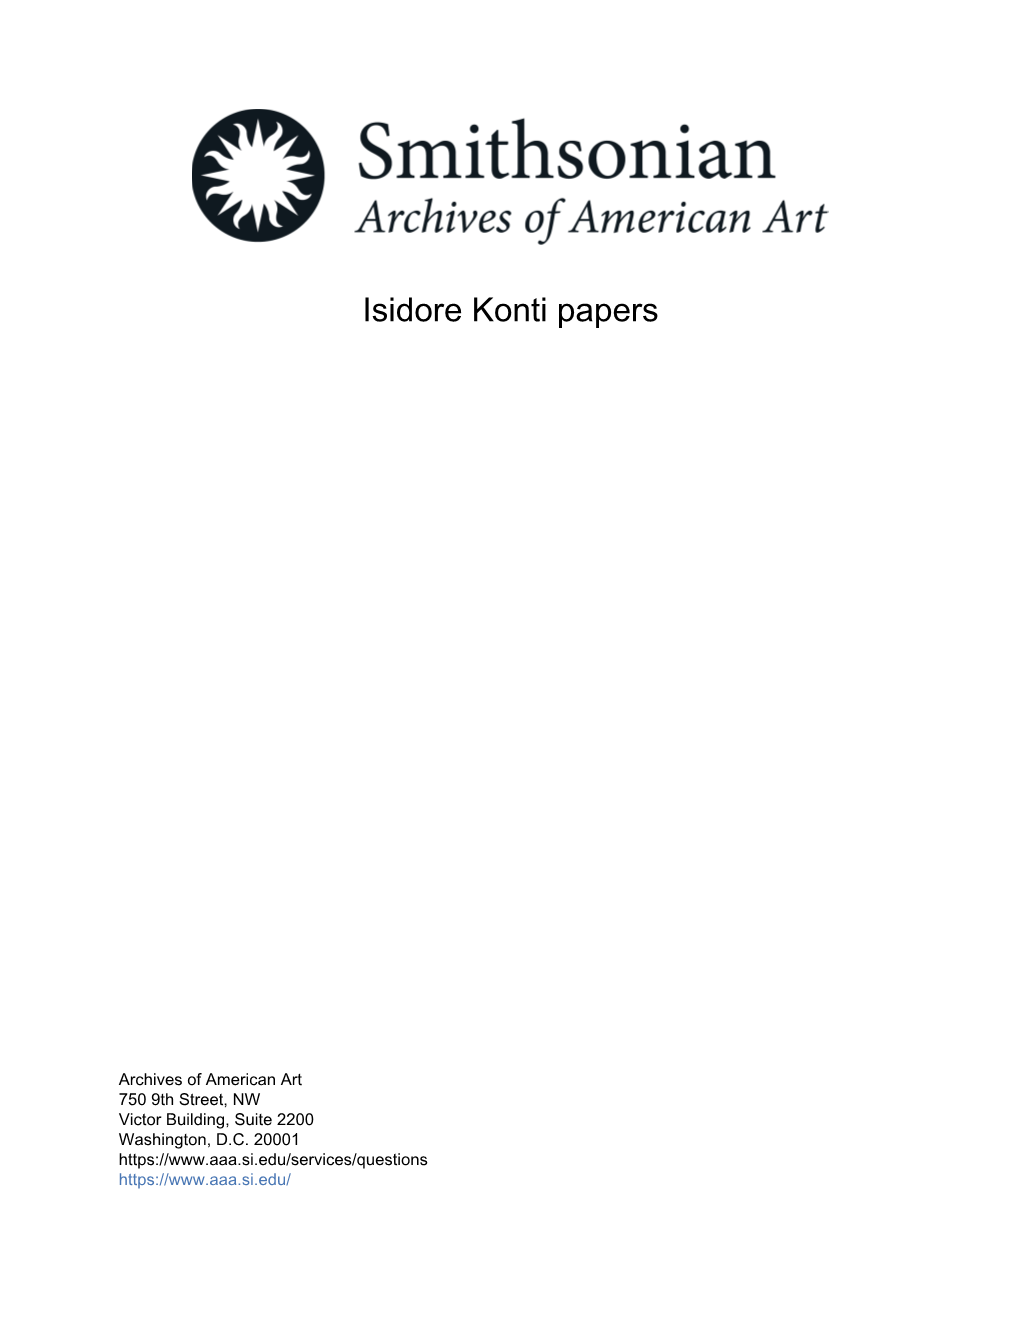 Isidore Konti Papers